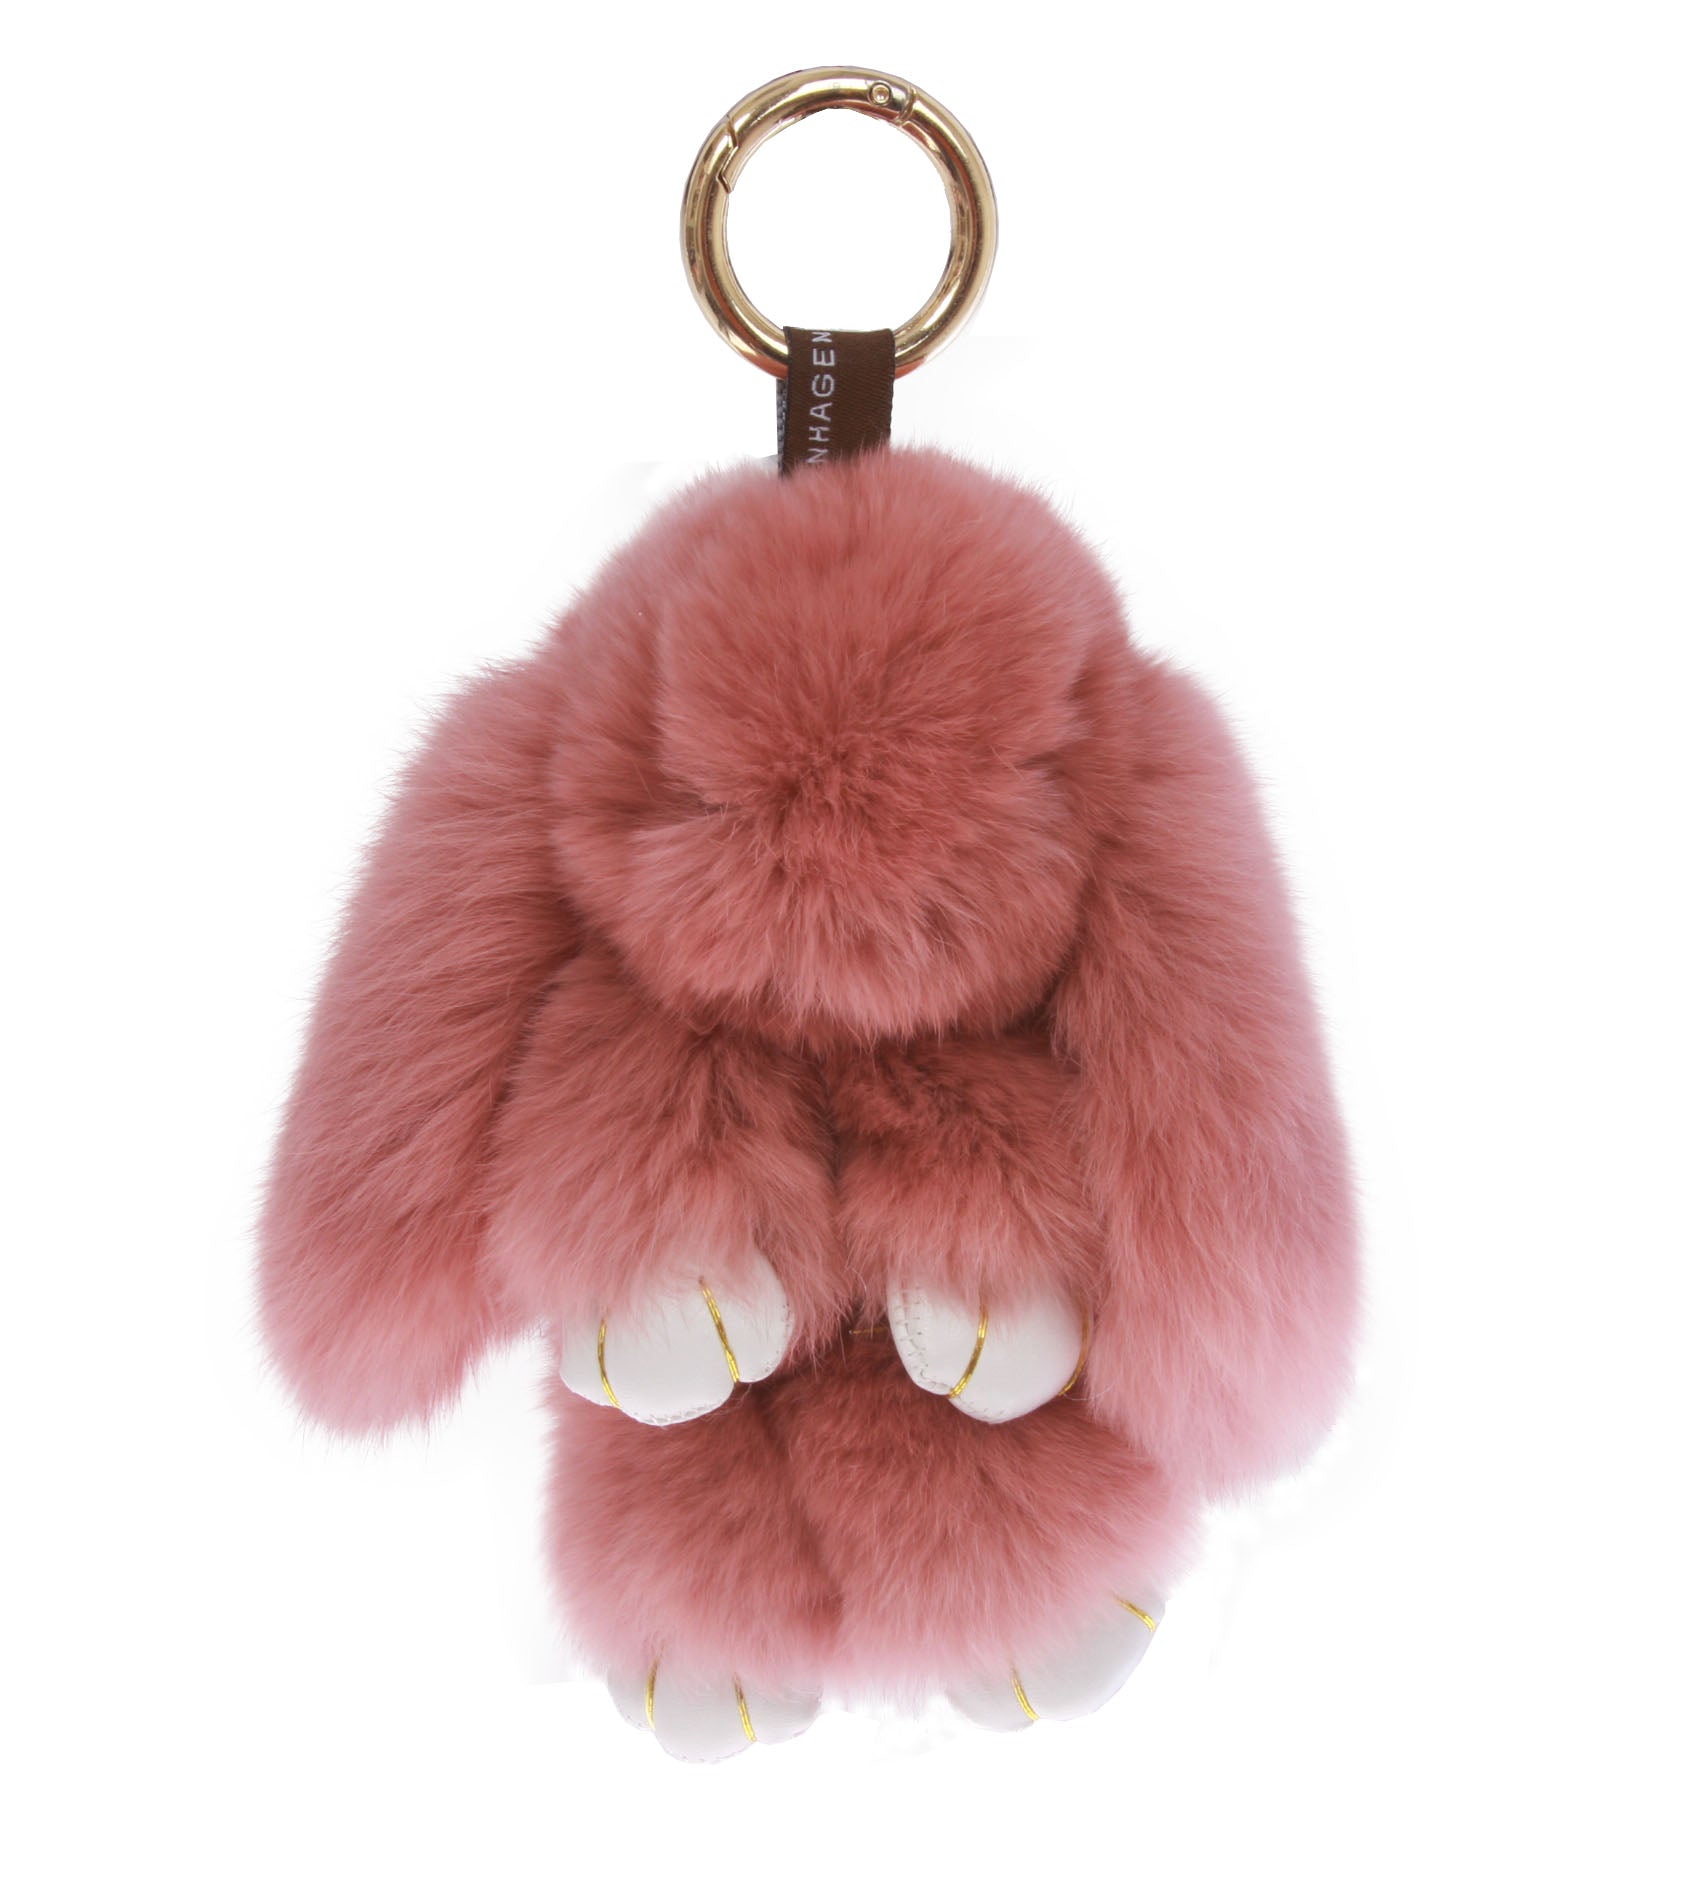 Real Rabbit Fur Doll Keychain for Womens Bag Charms or Car Pendant Key Chain